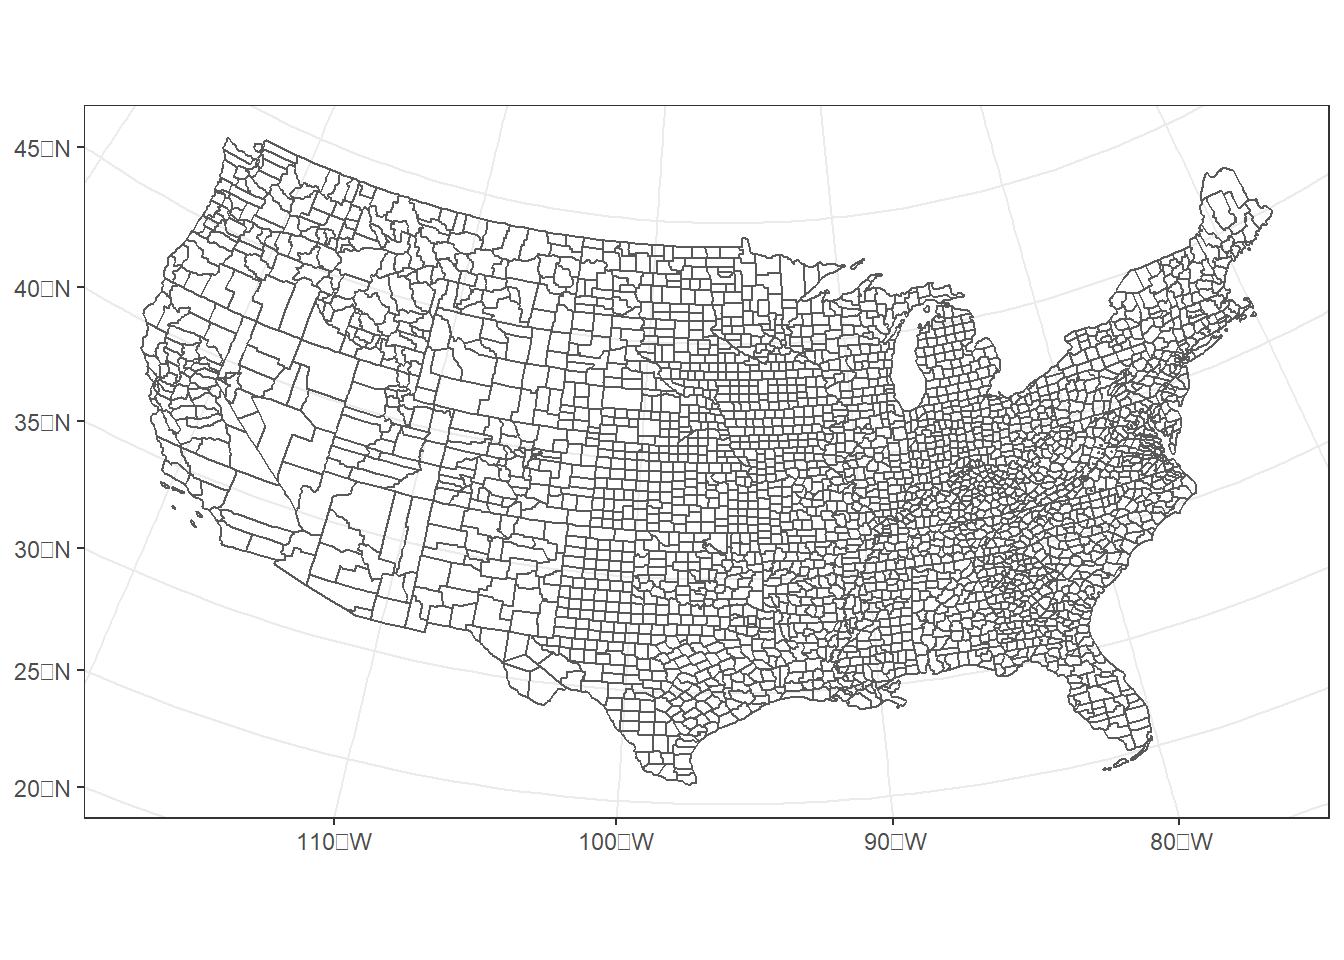 U.S. counties projected into an Albers Equal Area coordinate system with standard parallels located too far north.